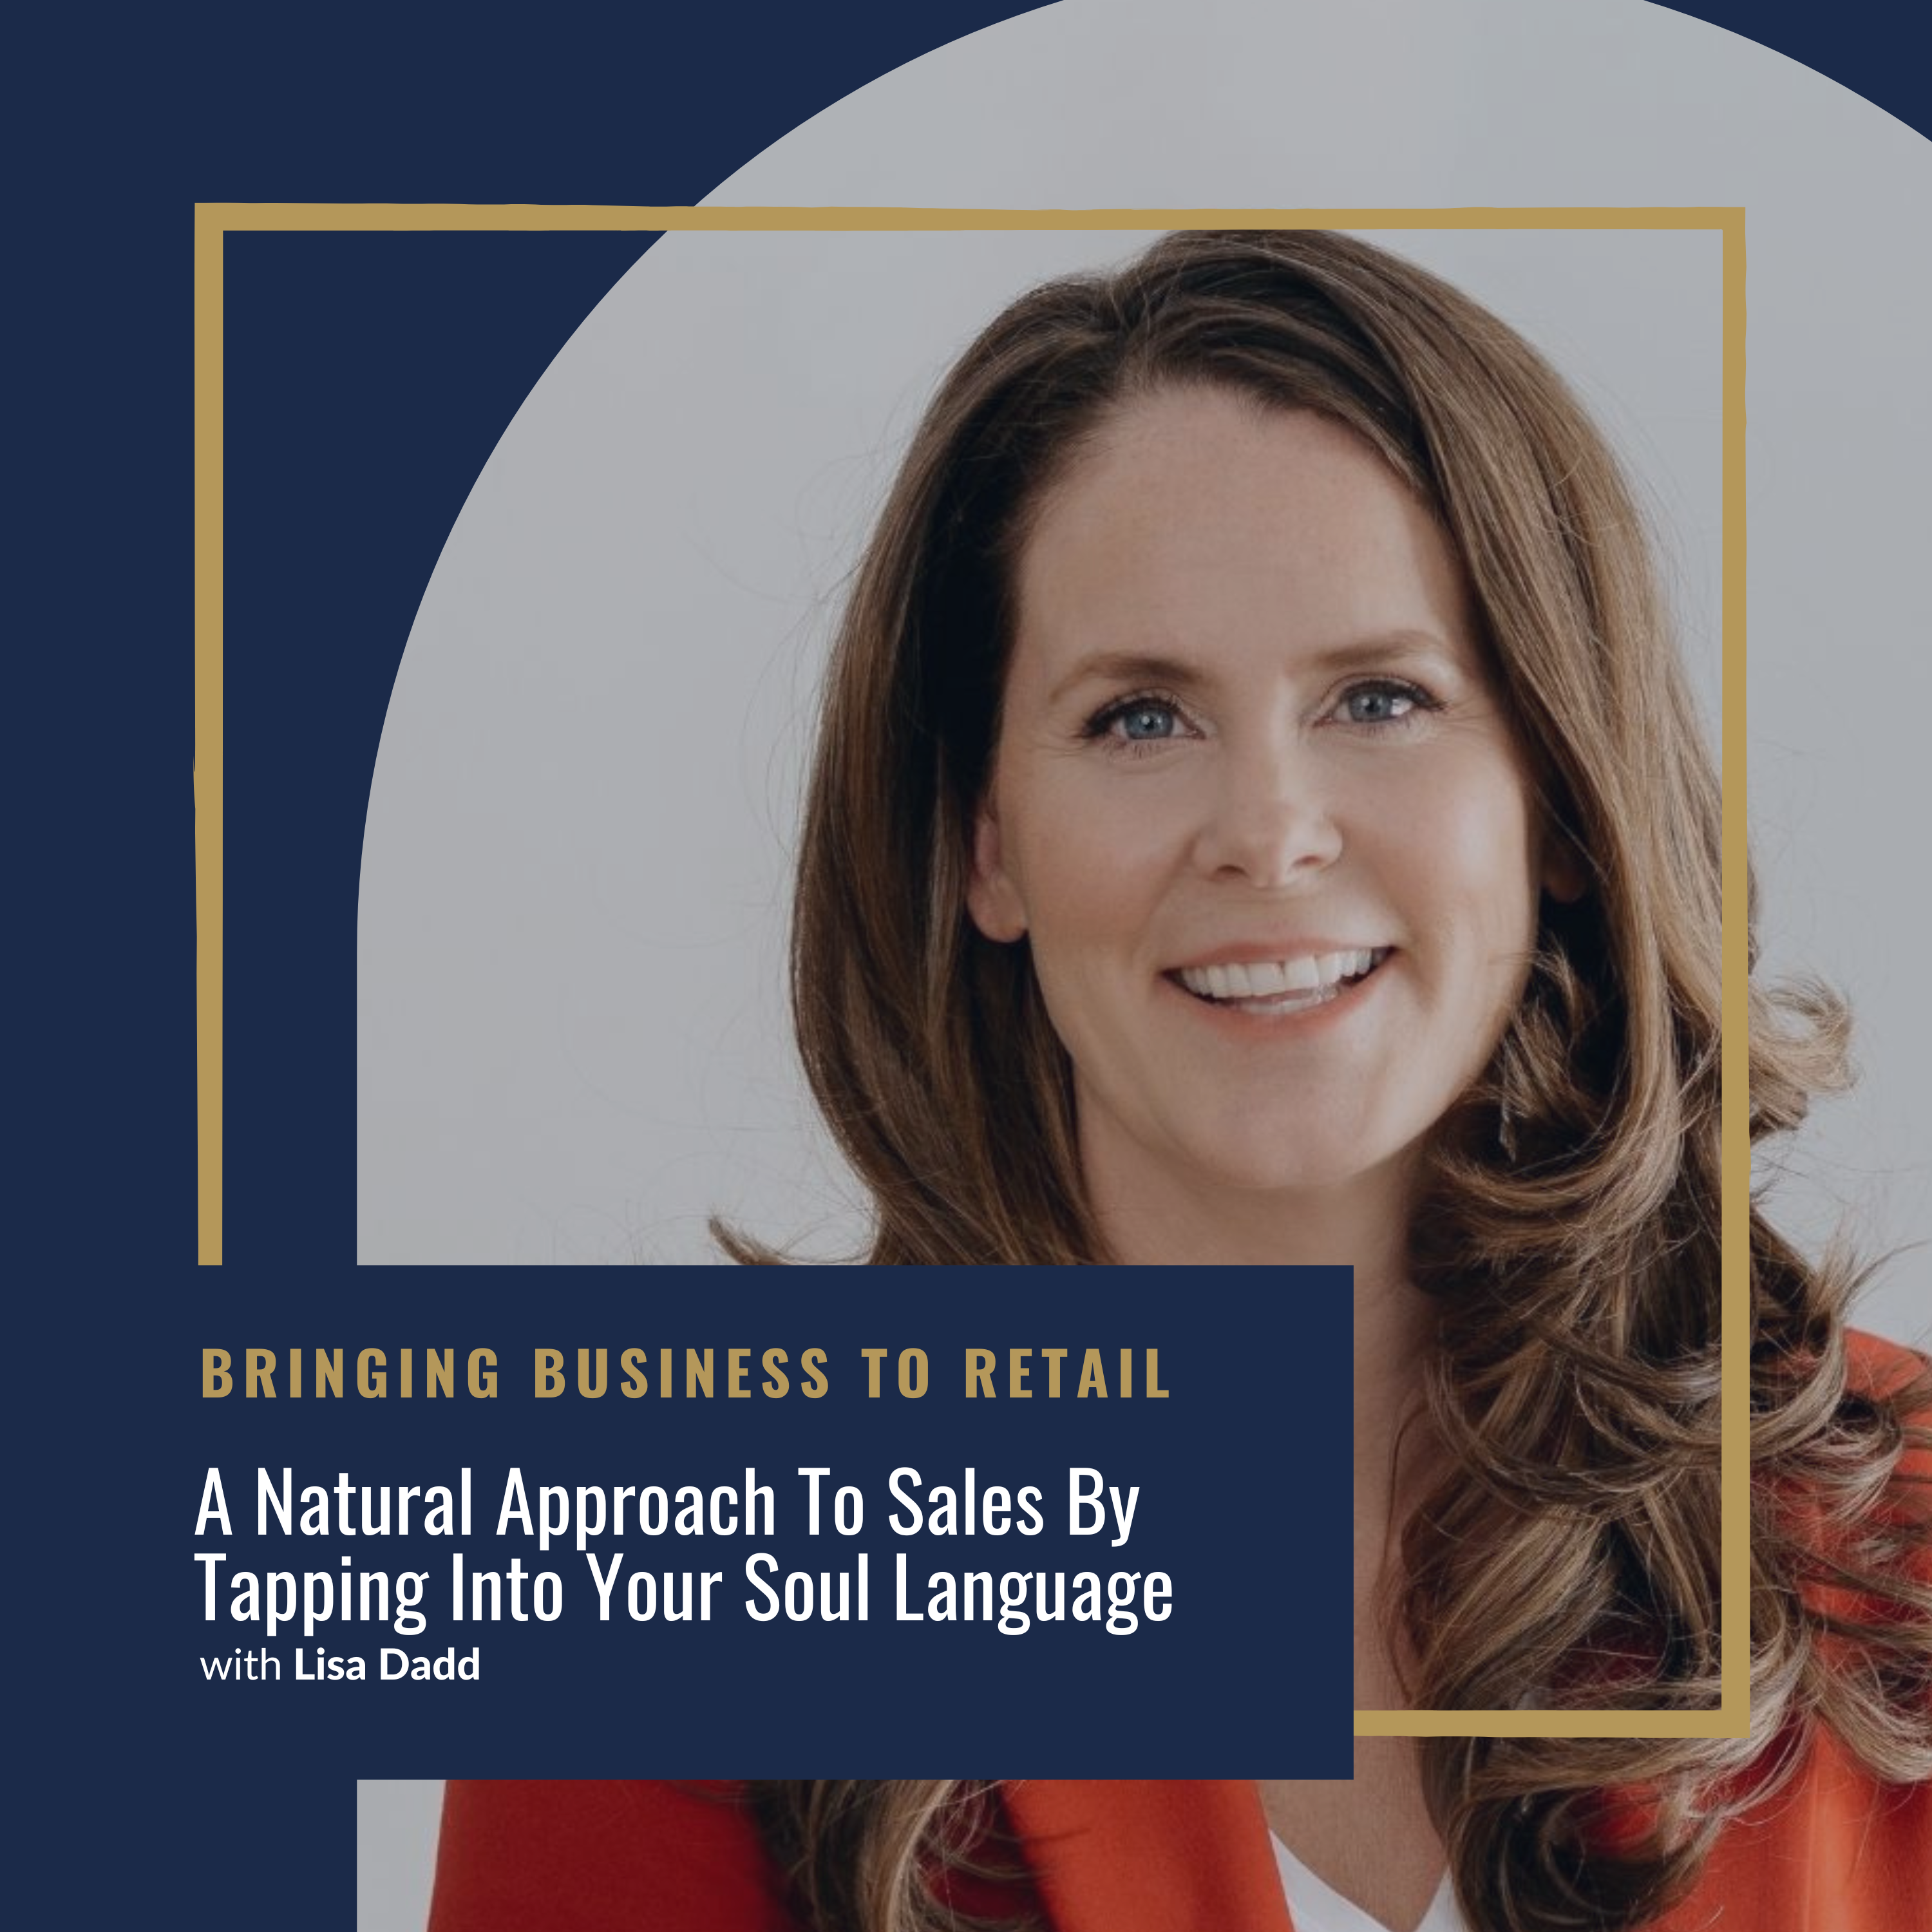 Lisa Dadd – A Natural Approach To Sales By Tapping Into Your Soul Language_wordpress